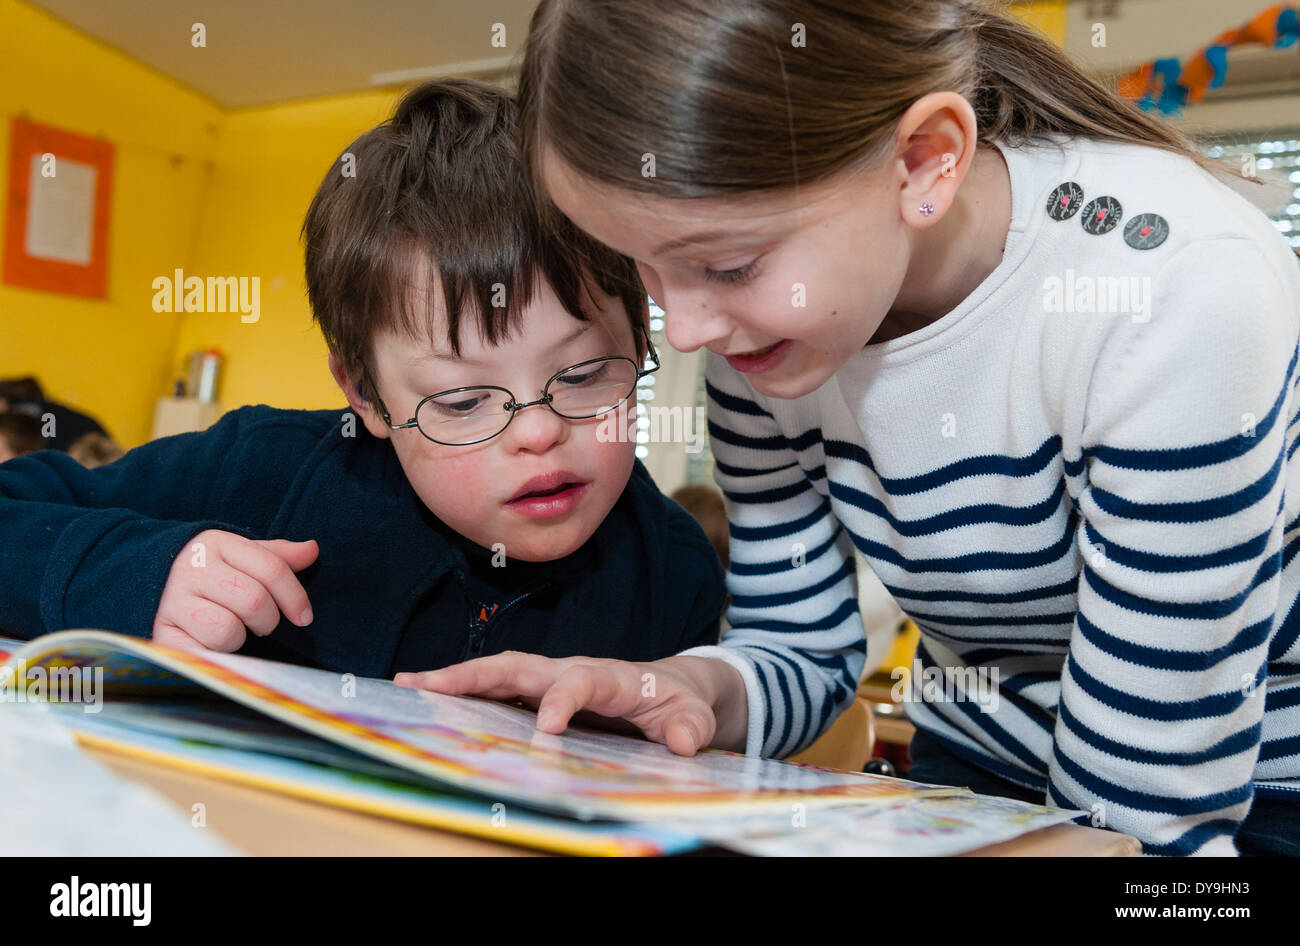 Non-disabled and disabled pupils (in this case a boy suffering from Down's syndrome) learn together in the same class. Stock Photo